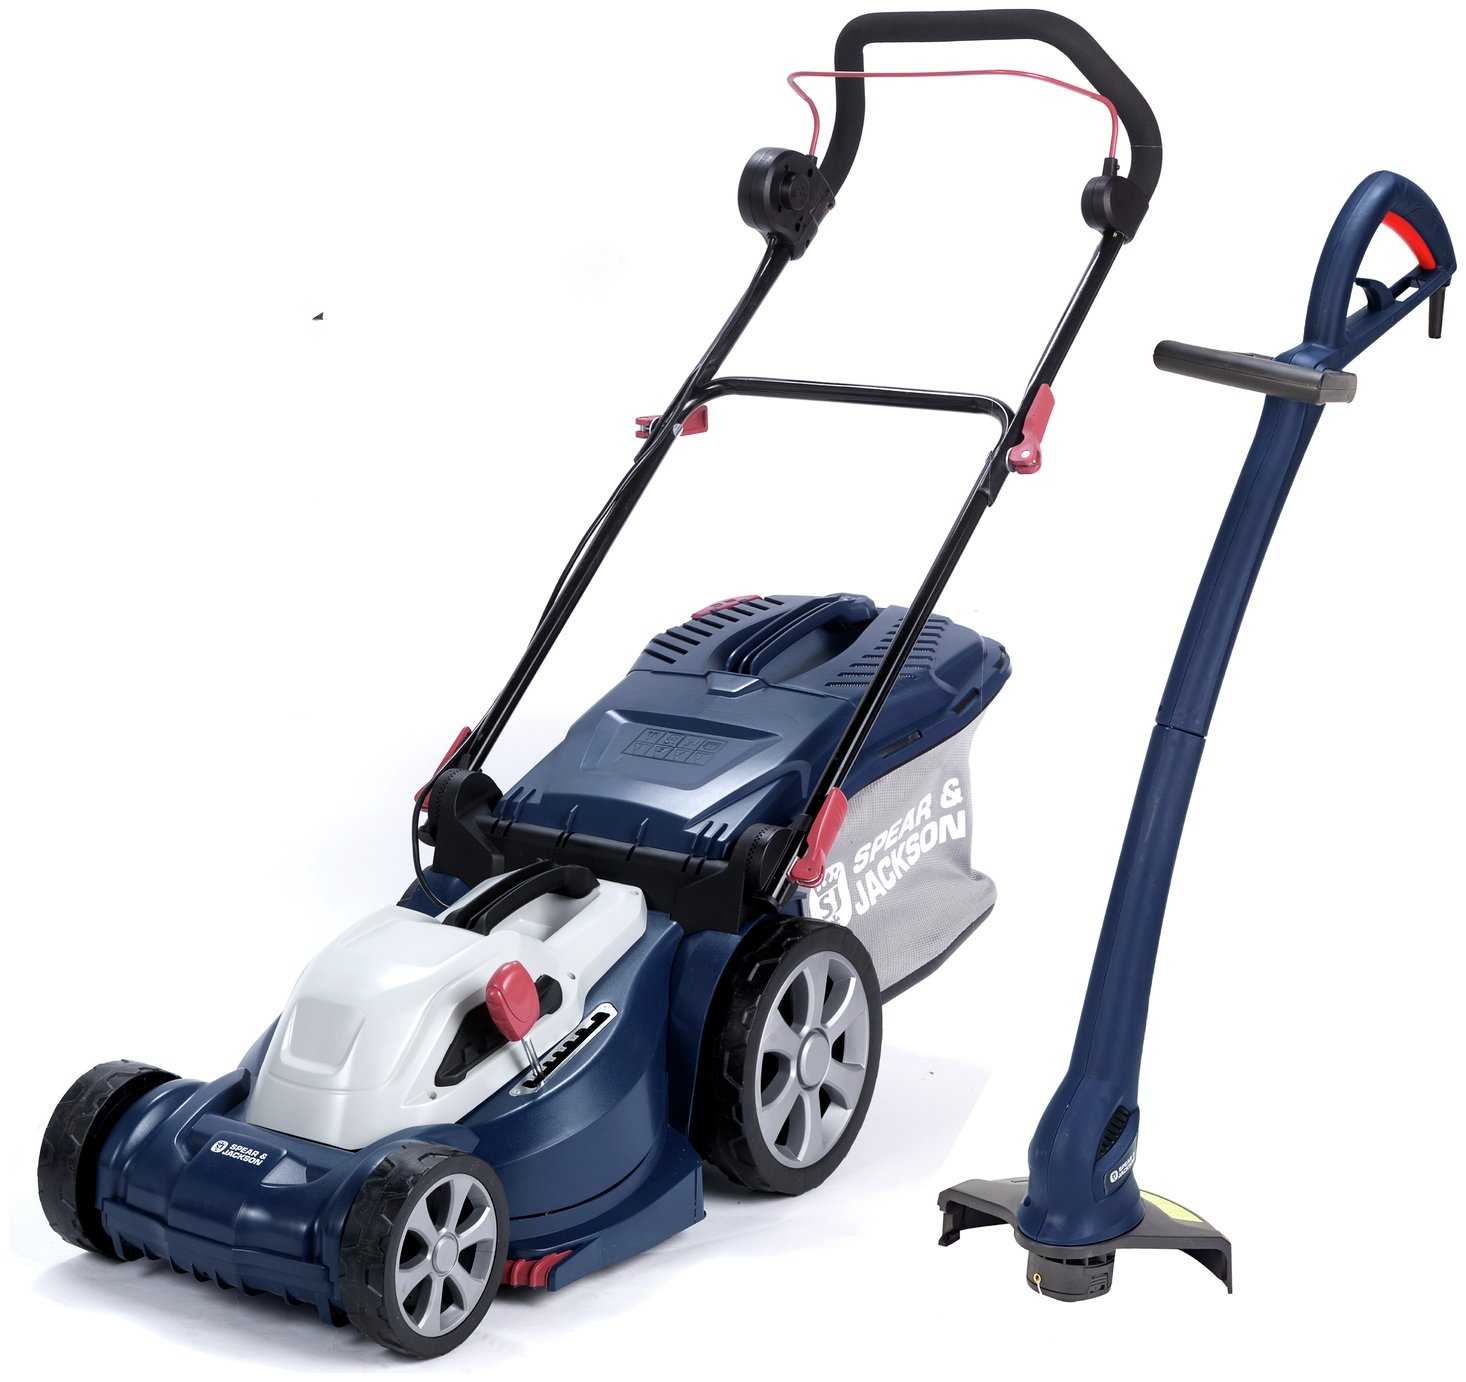 Spear & Jackson 36cm Corded Lawnmower 1400W and Trimmer 350W